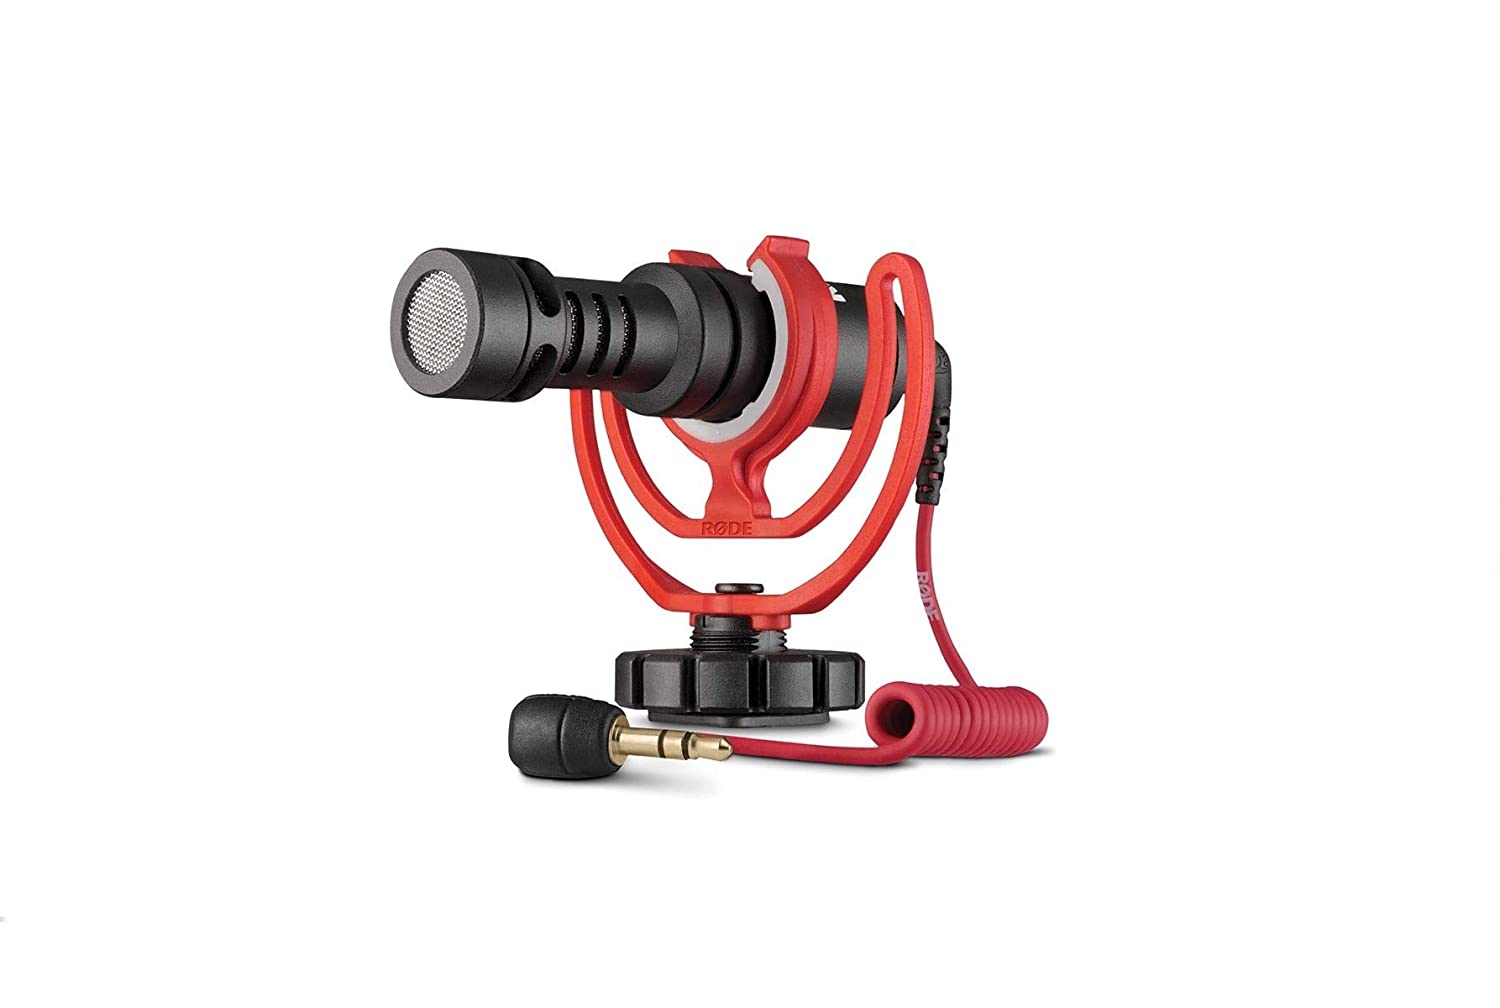 Best action camera microphone attachments